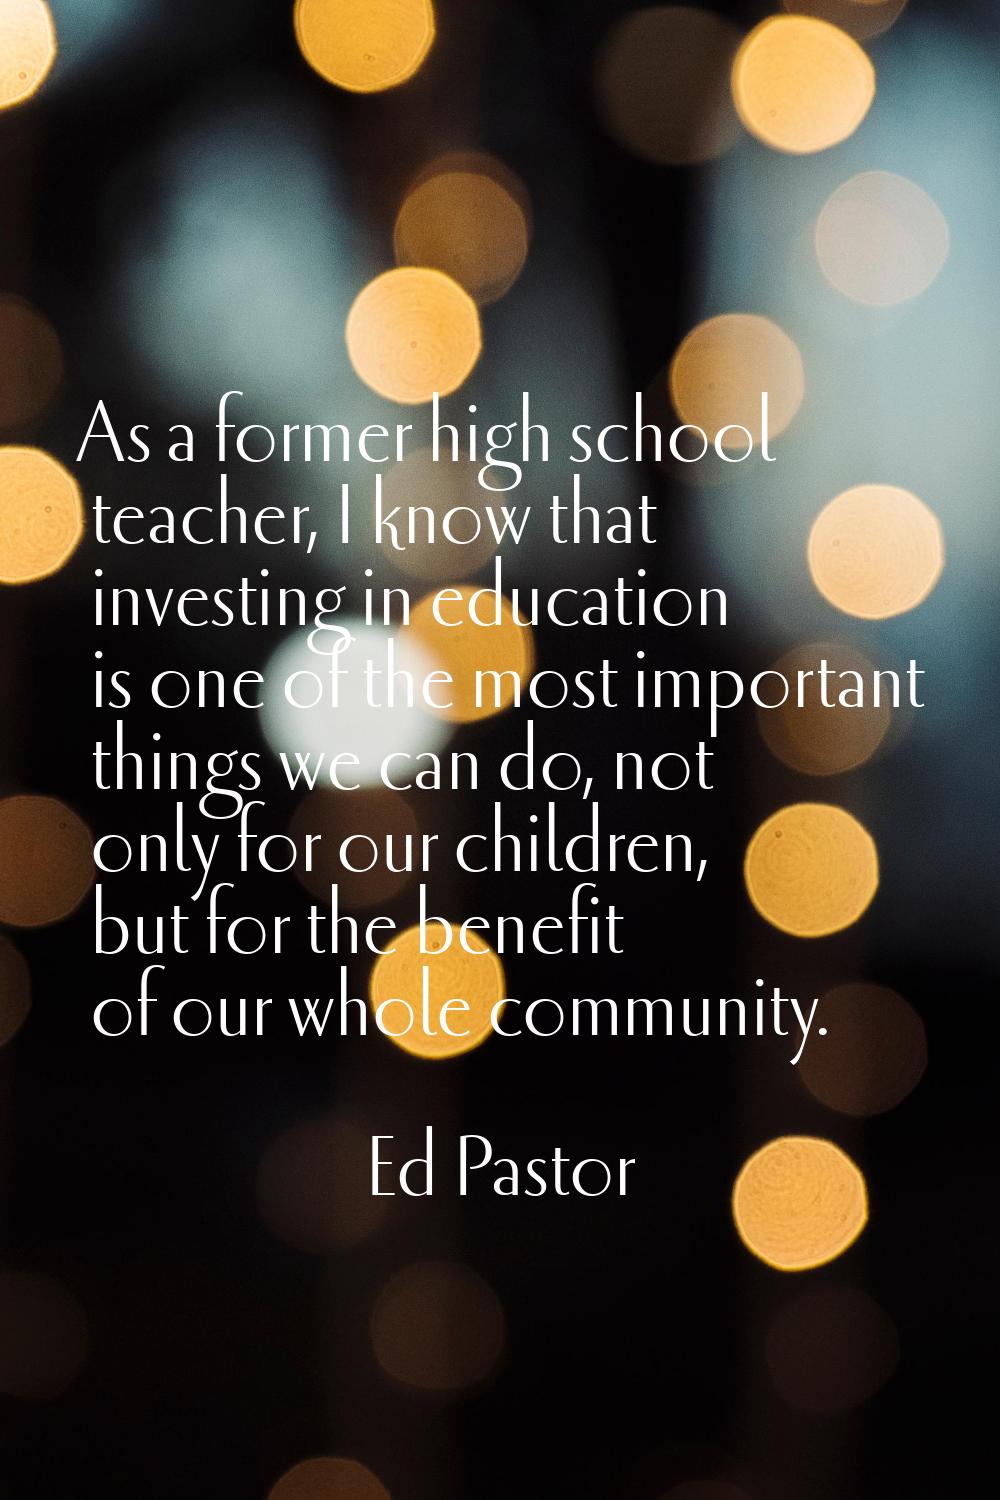 As a former high school teacher, I know that investing in education is one of the most important th